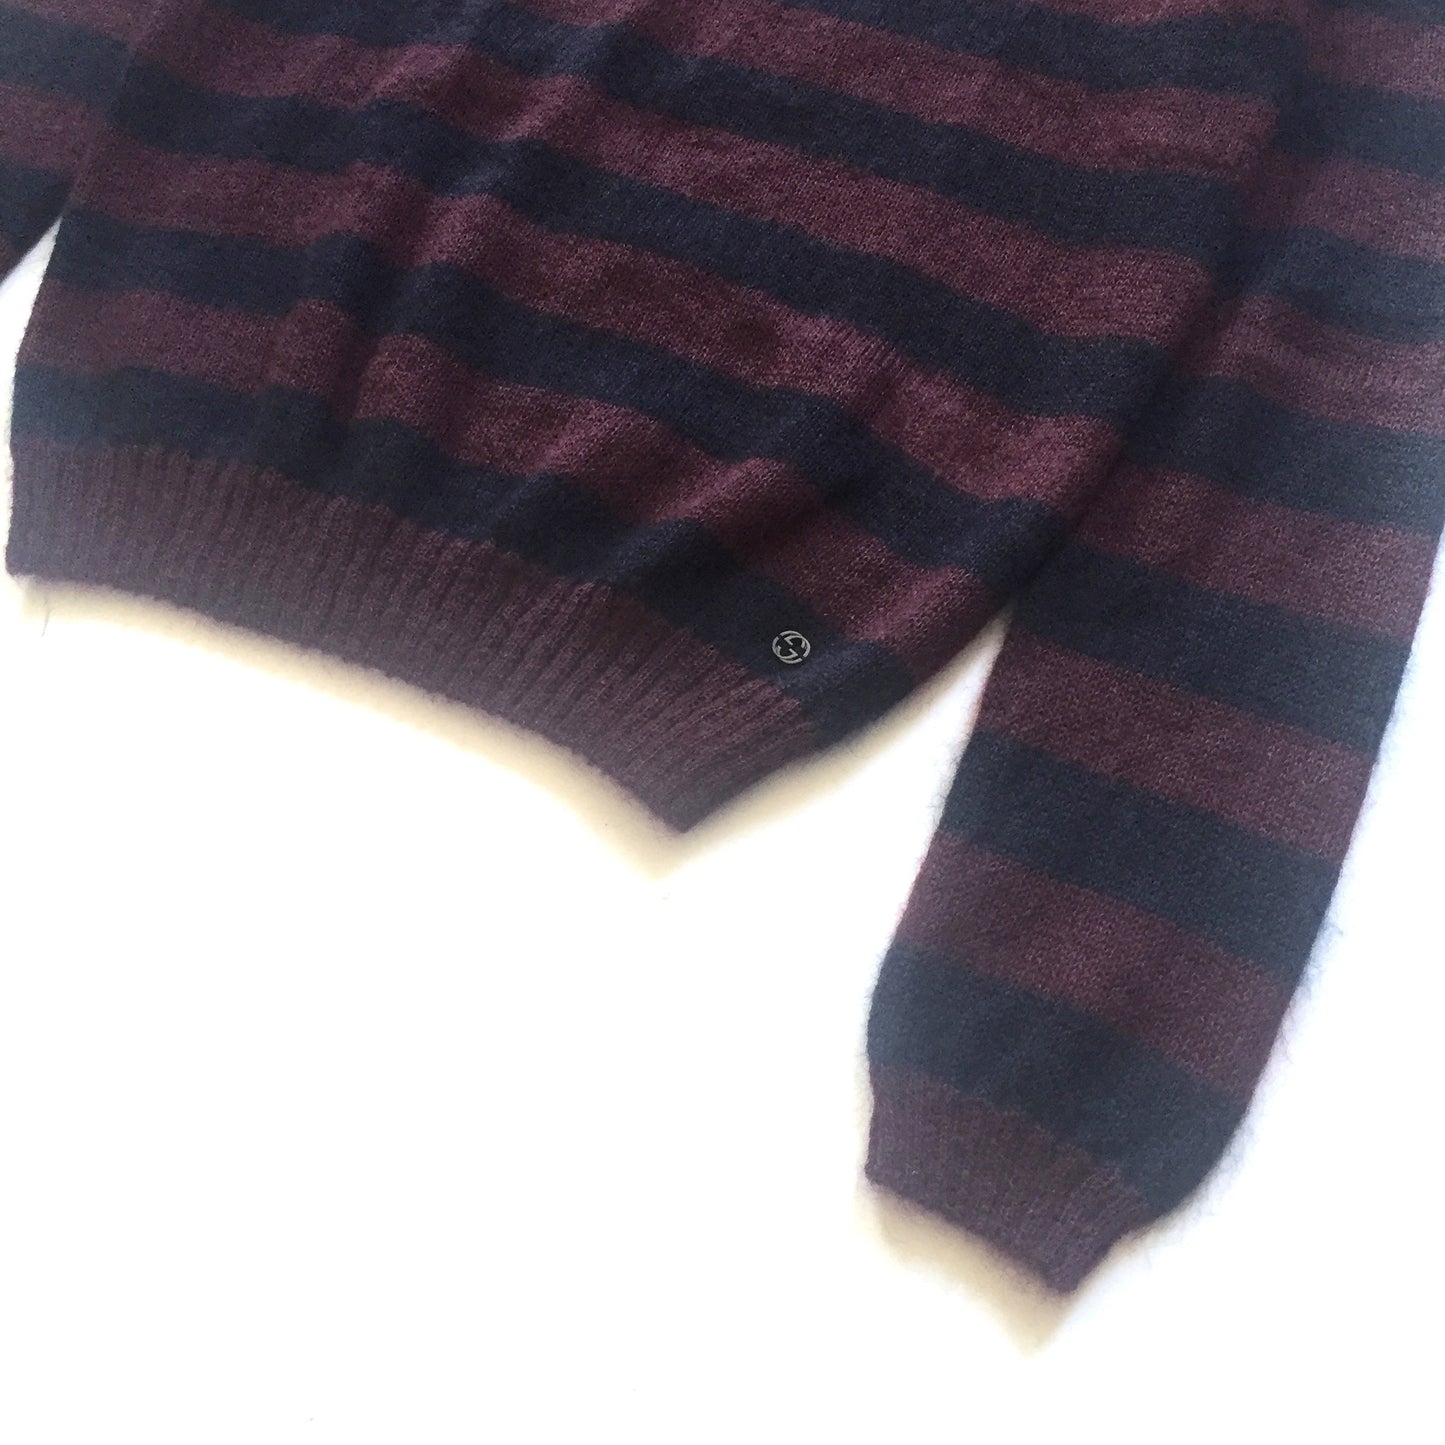 Gucci - Navy & Red Striped Mohair Sweater